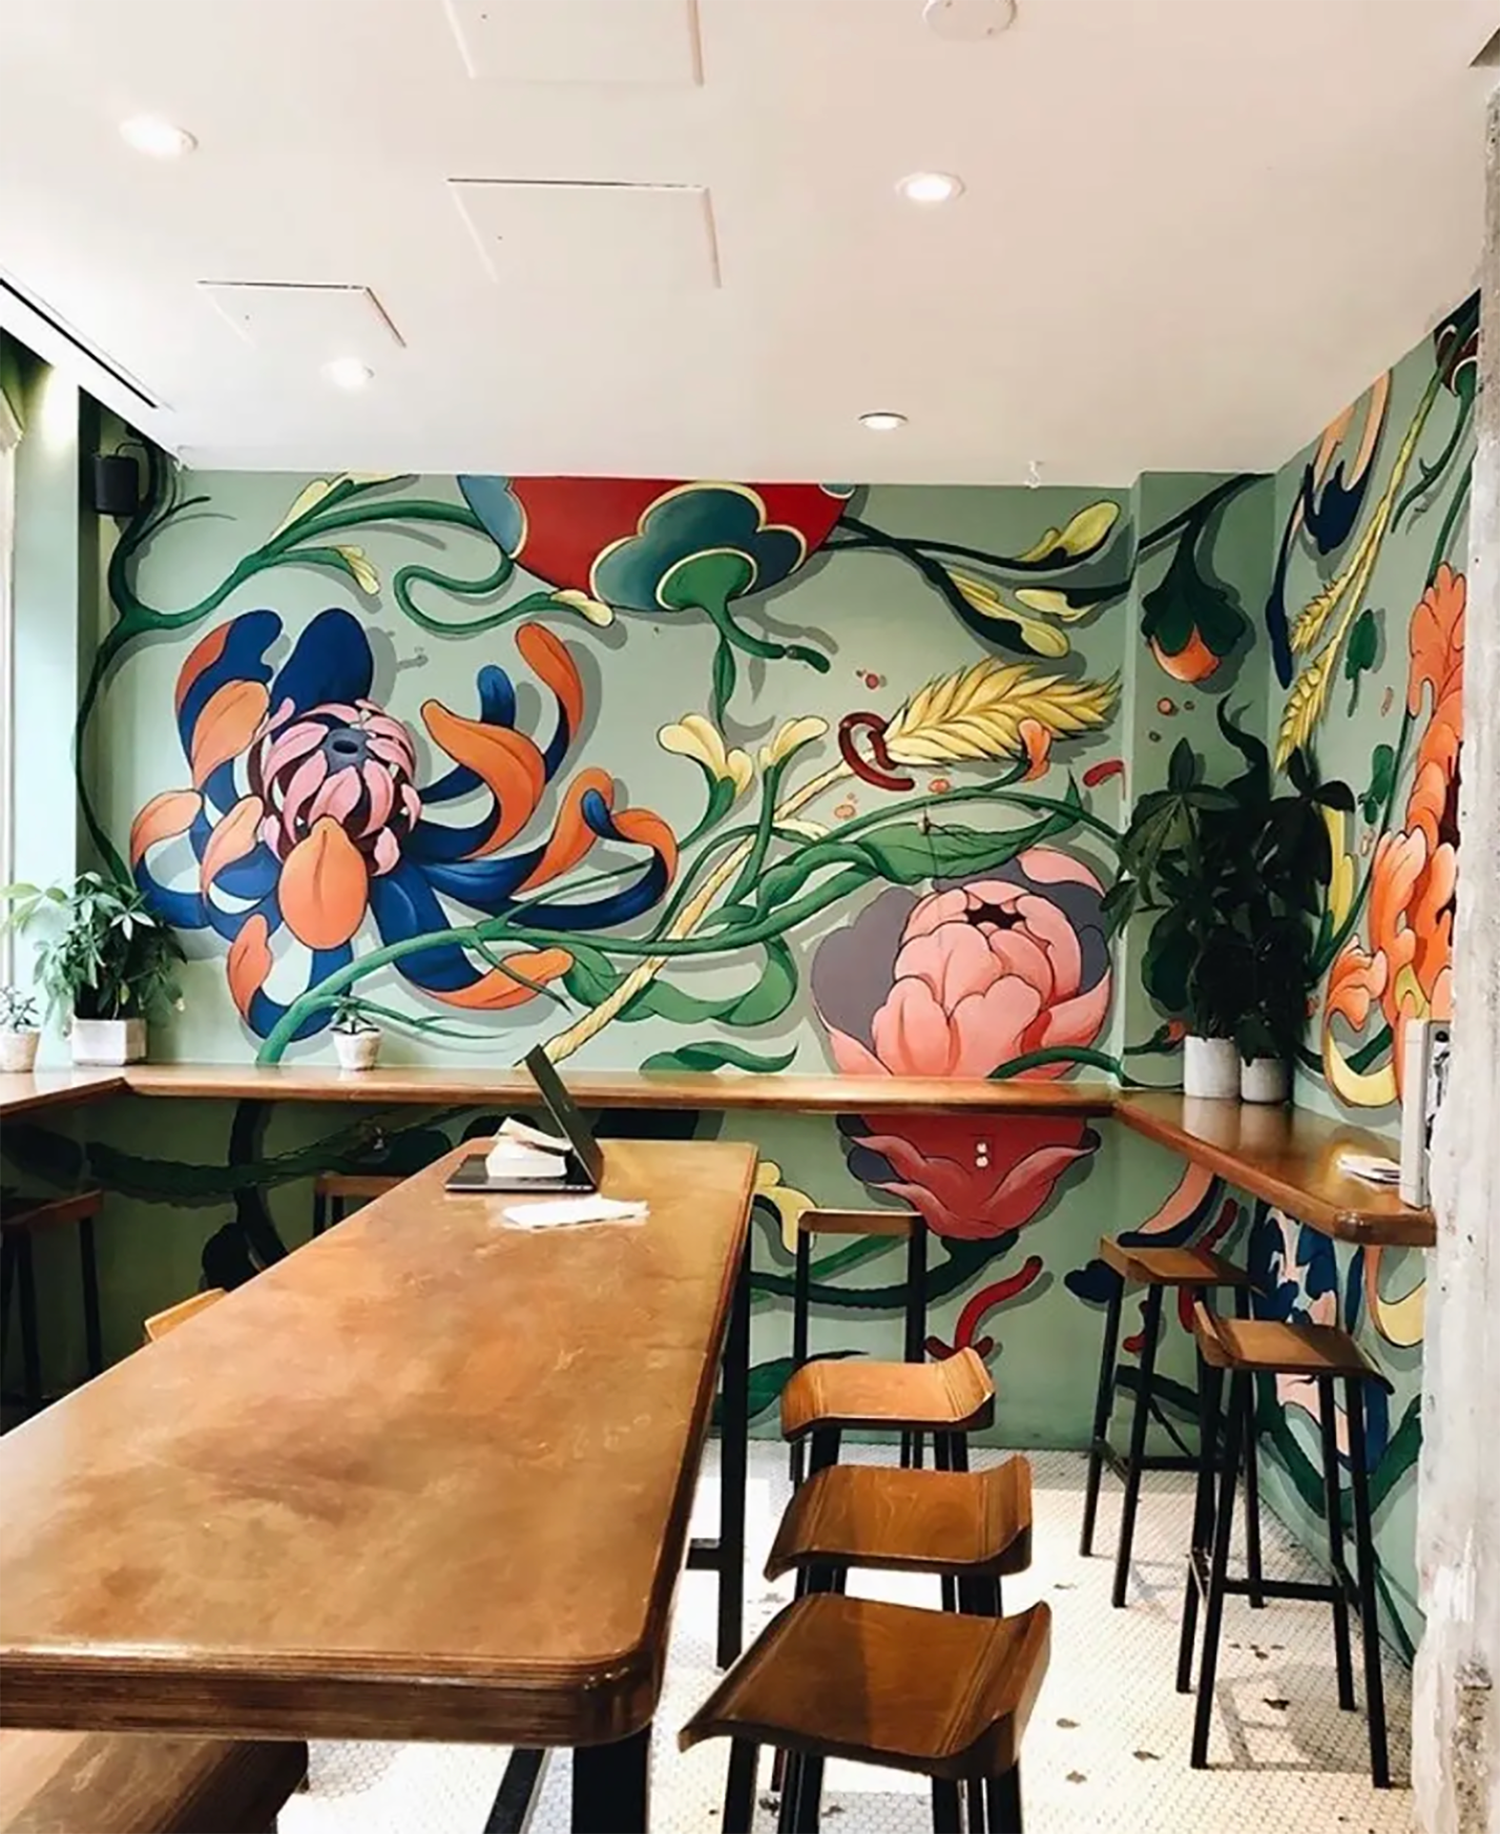 5 Design Ideas We're Stealing From This Montréal Cafe and Artist Workshop